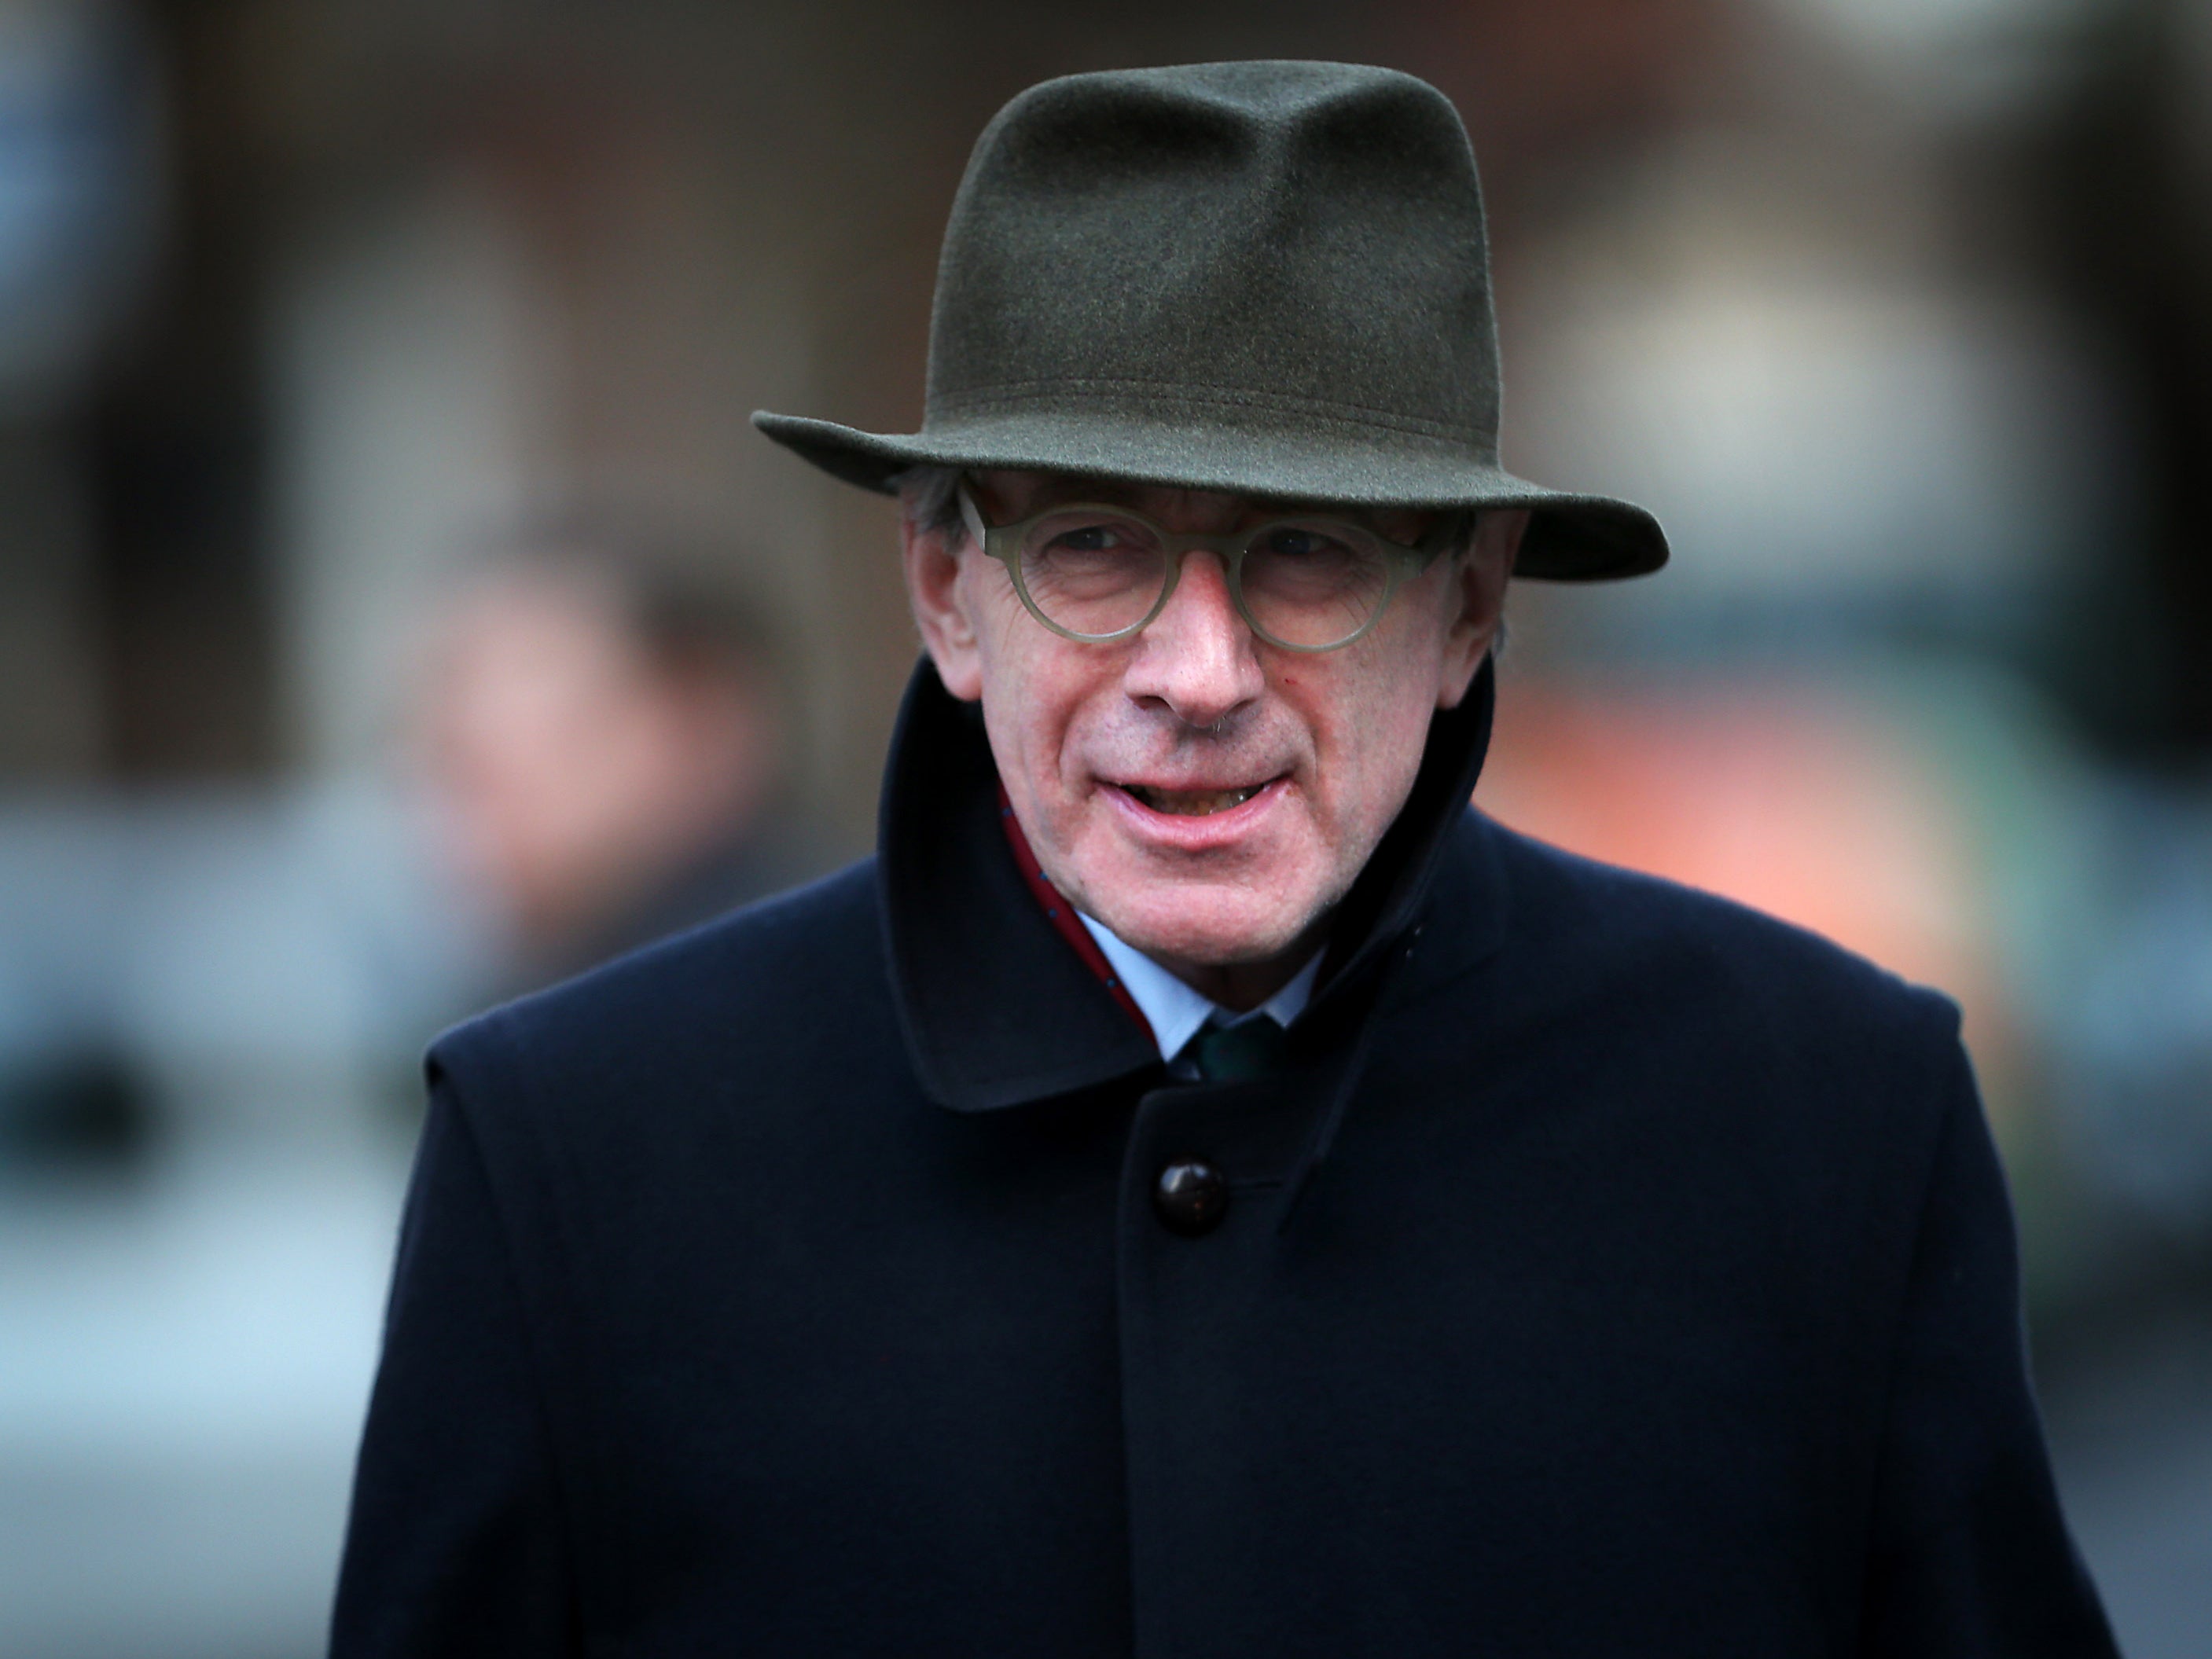 Sir Malcolm Rifkind said it is ‘difficult to believe’ Israel’s approach meets acceptable standards